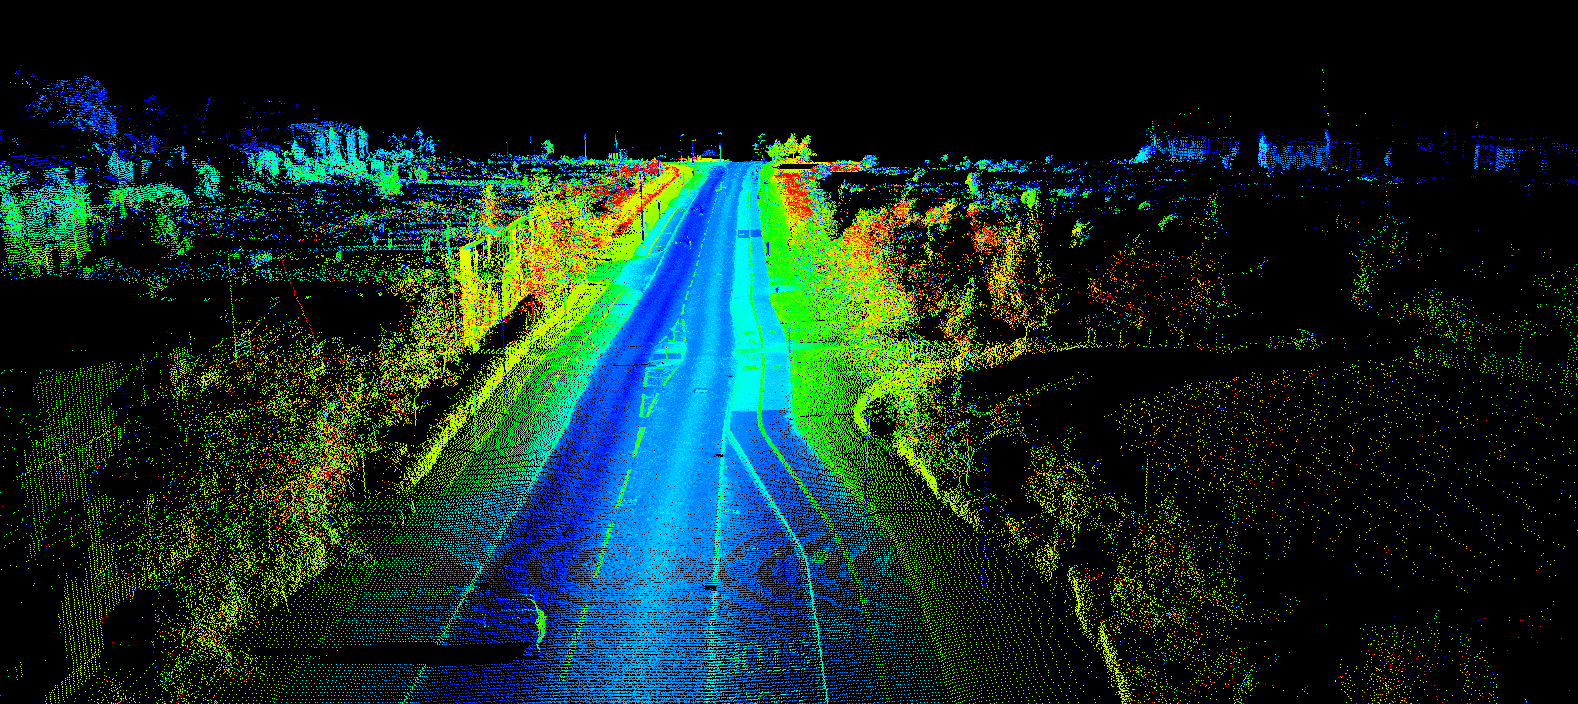 LiDAR is a method for measuring distances (ranging) by illuminating the target with laser light and measuring the reflection with a sensor